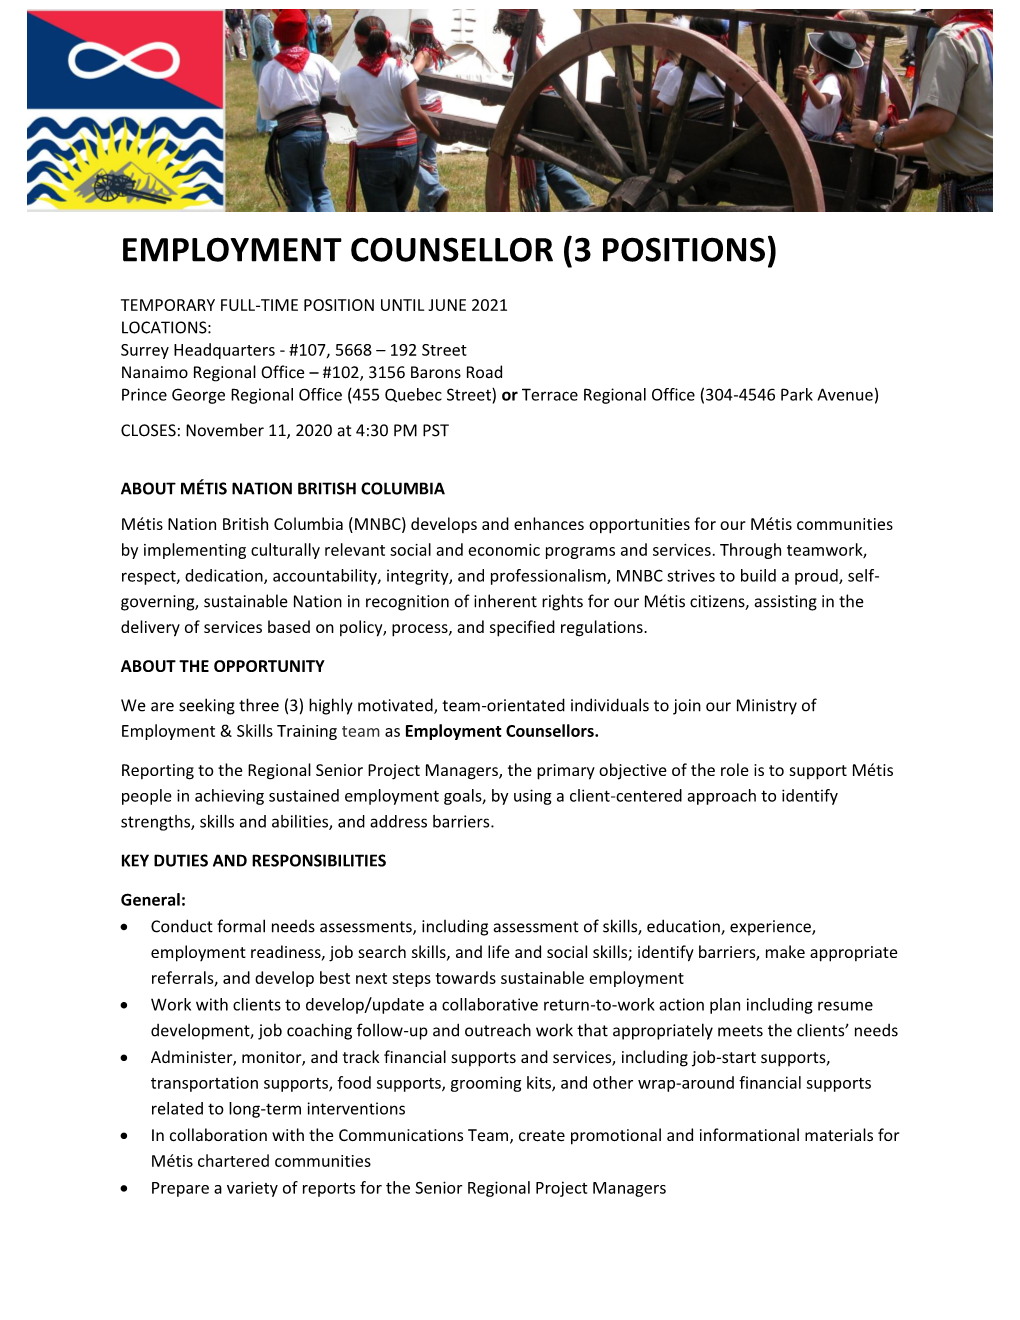 Employment Counsellor (3 Positions)